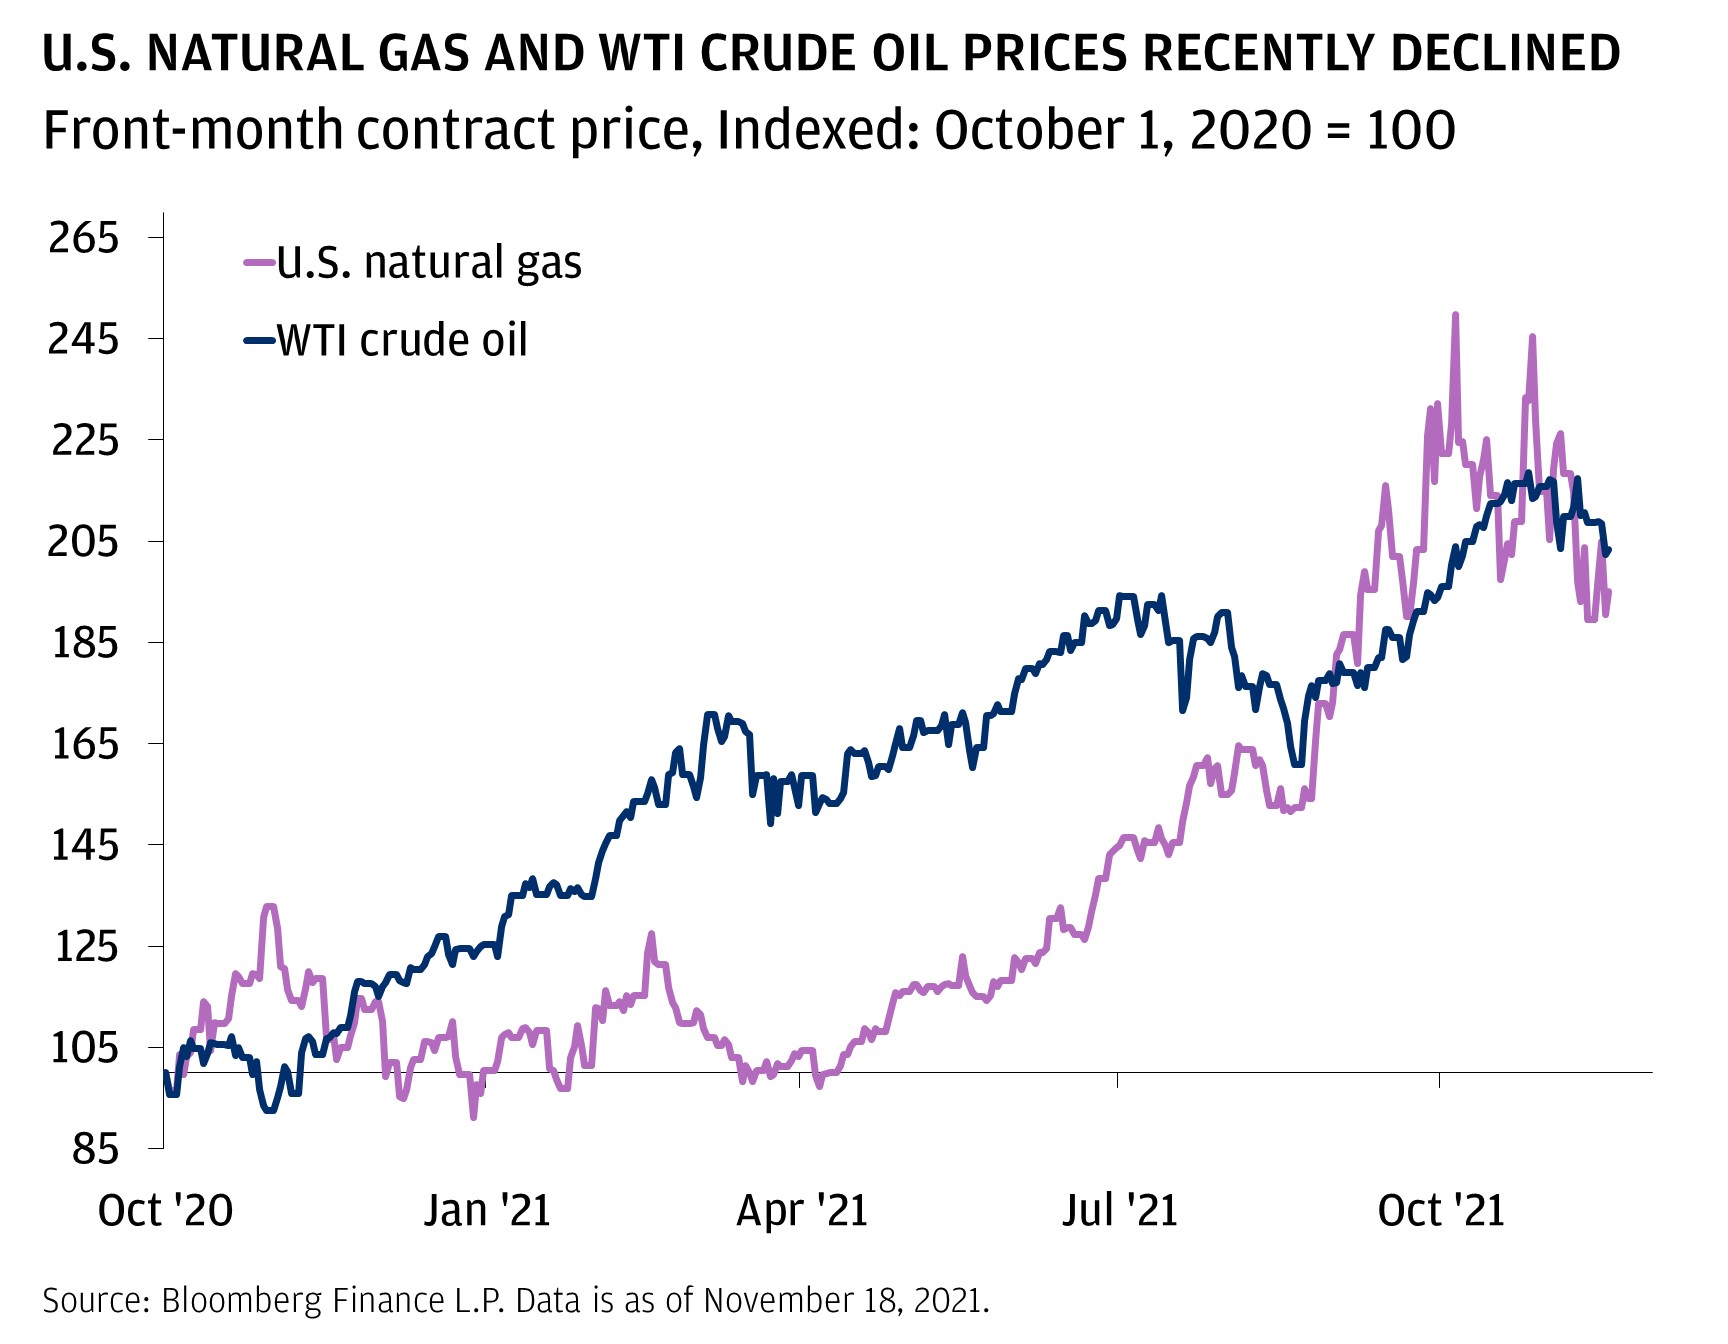 This chart shows the prices of U.S. natural gas and WTI crude oil from October 1, 2020, to November 17, 2021. The prices are indexed to 100, representing the respective levels on October 1, 2020. From there, WTI crude oil declined a bit before it before it rose to 104.9 while U.S. natural gas inclined to 108.5 by October 9, 2020. Then, WTI crude oil maintained rangebound before it declined to 92.4 by November 1, 2020. Meanwhile, U.S. natural gas kept increasing to a peak of 132.7. Here, WTI crude oil rose to 117.6 while U.S. natural gas dropped to 94.9 by December 8, 2020. From there, both increased to 123.3 for WTI crude oil and 110 for U.S. natural gas by December 22, 2020. Then, WTI crude oil declined to 122.9 by January 4, 2021 while U.S. natural gas declined to 91.2 before it rose back to 106.8 by January 9, 2021. From there, WTI crude oil inclined to 138.4 while U.S. natural gas rose a bit to 108.3 by January 18, 2021. Then, WTI crude oil declined to 134.8 by January 31, 2020. Meanwhile, U.S. natural gas declined to 96.8 and then rose to 114.1 by February 8, 2021. Here, WTI crude oil gradually rose to 156.3 and U.S. natural gas inclined to a peak of 127.4 by February 18, 2021. Then, WTI crude oil rose to a relative peak of 170.7 by March 7, 2021. Meanwhile, U.S. natural gas declined to 98.2 by March 18, 2021. Here, WTI crude oil dropped to 149.2 by March 23, 2021. From there, both gradually rose to 169.1 for WTI crude oil and to 123 for U.S. natural gas by May 17, 2021. Then, WTI crude oil rose to a relative peak of 194.3 by July 13, 2021, while U.S. natural gas inclined to 163.4 by August 6, 2021. Here, WTI crude oil declined to 171.5 before rising to 190.9 and then dropping back to 160.9 by August 22, 2021. Meanwhile, U.S. natural gas declined to 152.4. From there, WTI crude oil rose to 185.9 while U.S. natural gas increased to 216.1 by September 17, 2021. Then, U.S. natural gas spiked to 249.8 by October 5, 2021. Here, U.S. natural gas dipped to 197.4 and t